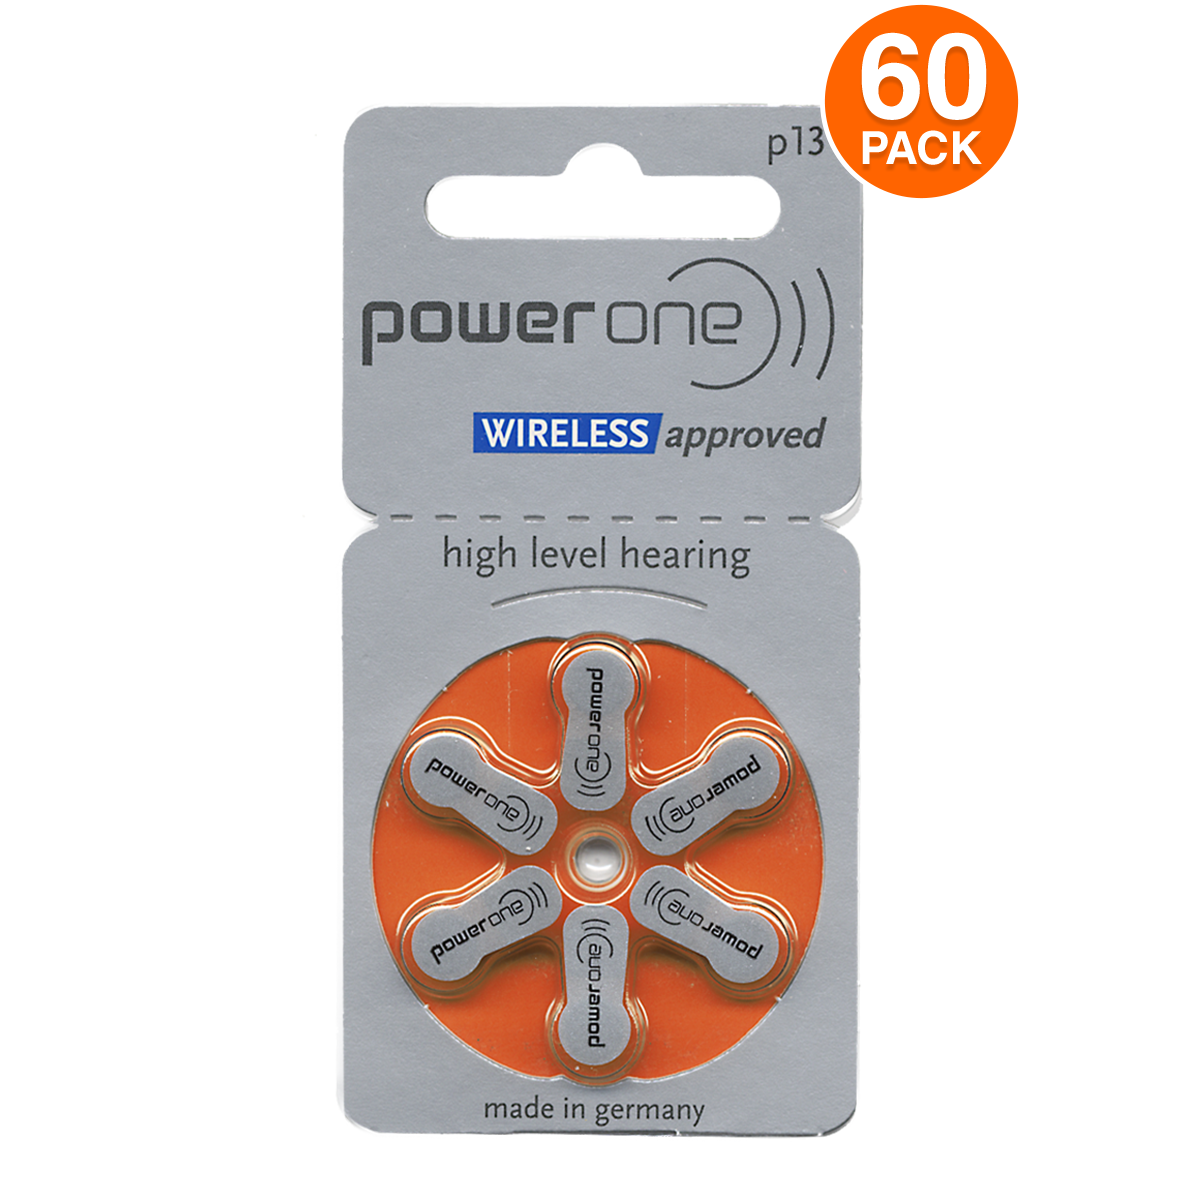 Power One Size 13 1.45v Mf Hearing Aid Batteries Pr48, P13 (60 Batteries)